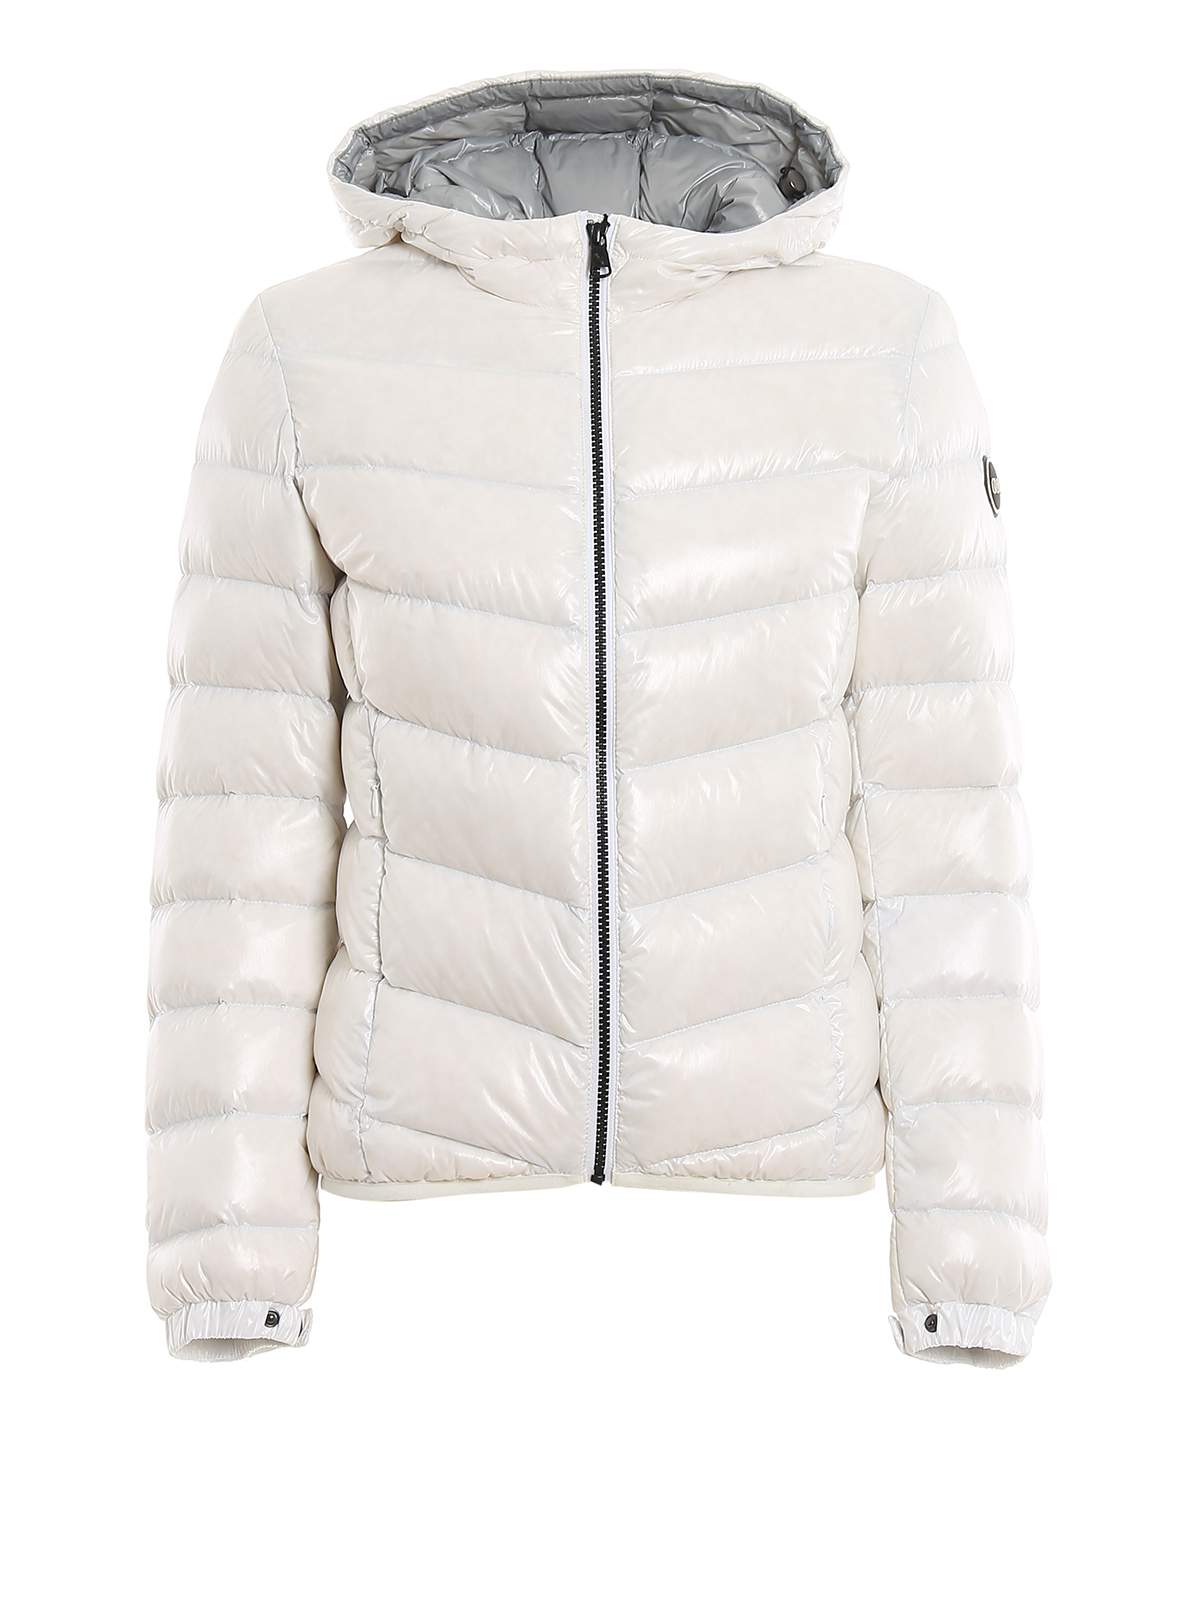 Padded jackets Colmar Originals - Glossy white hooded puffer jacket ...